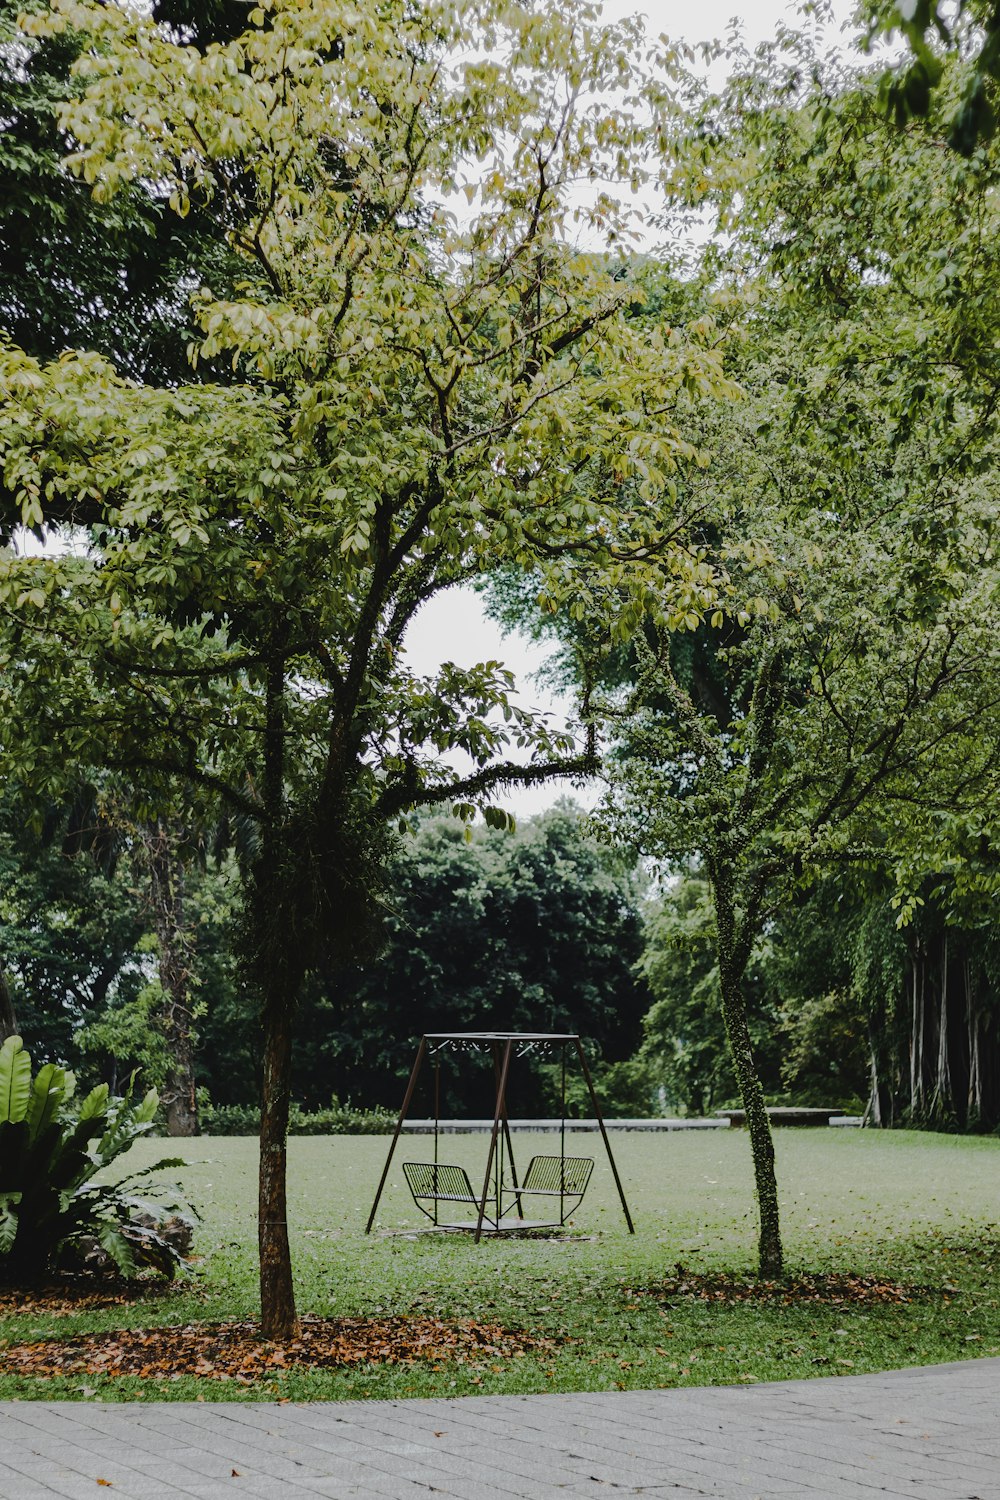 a park with a swing set and trees